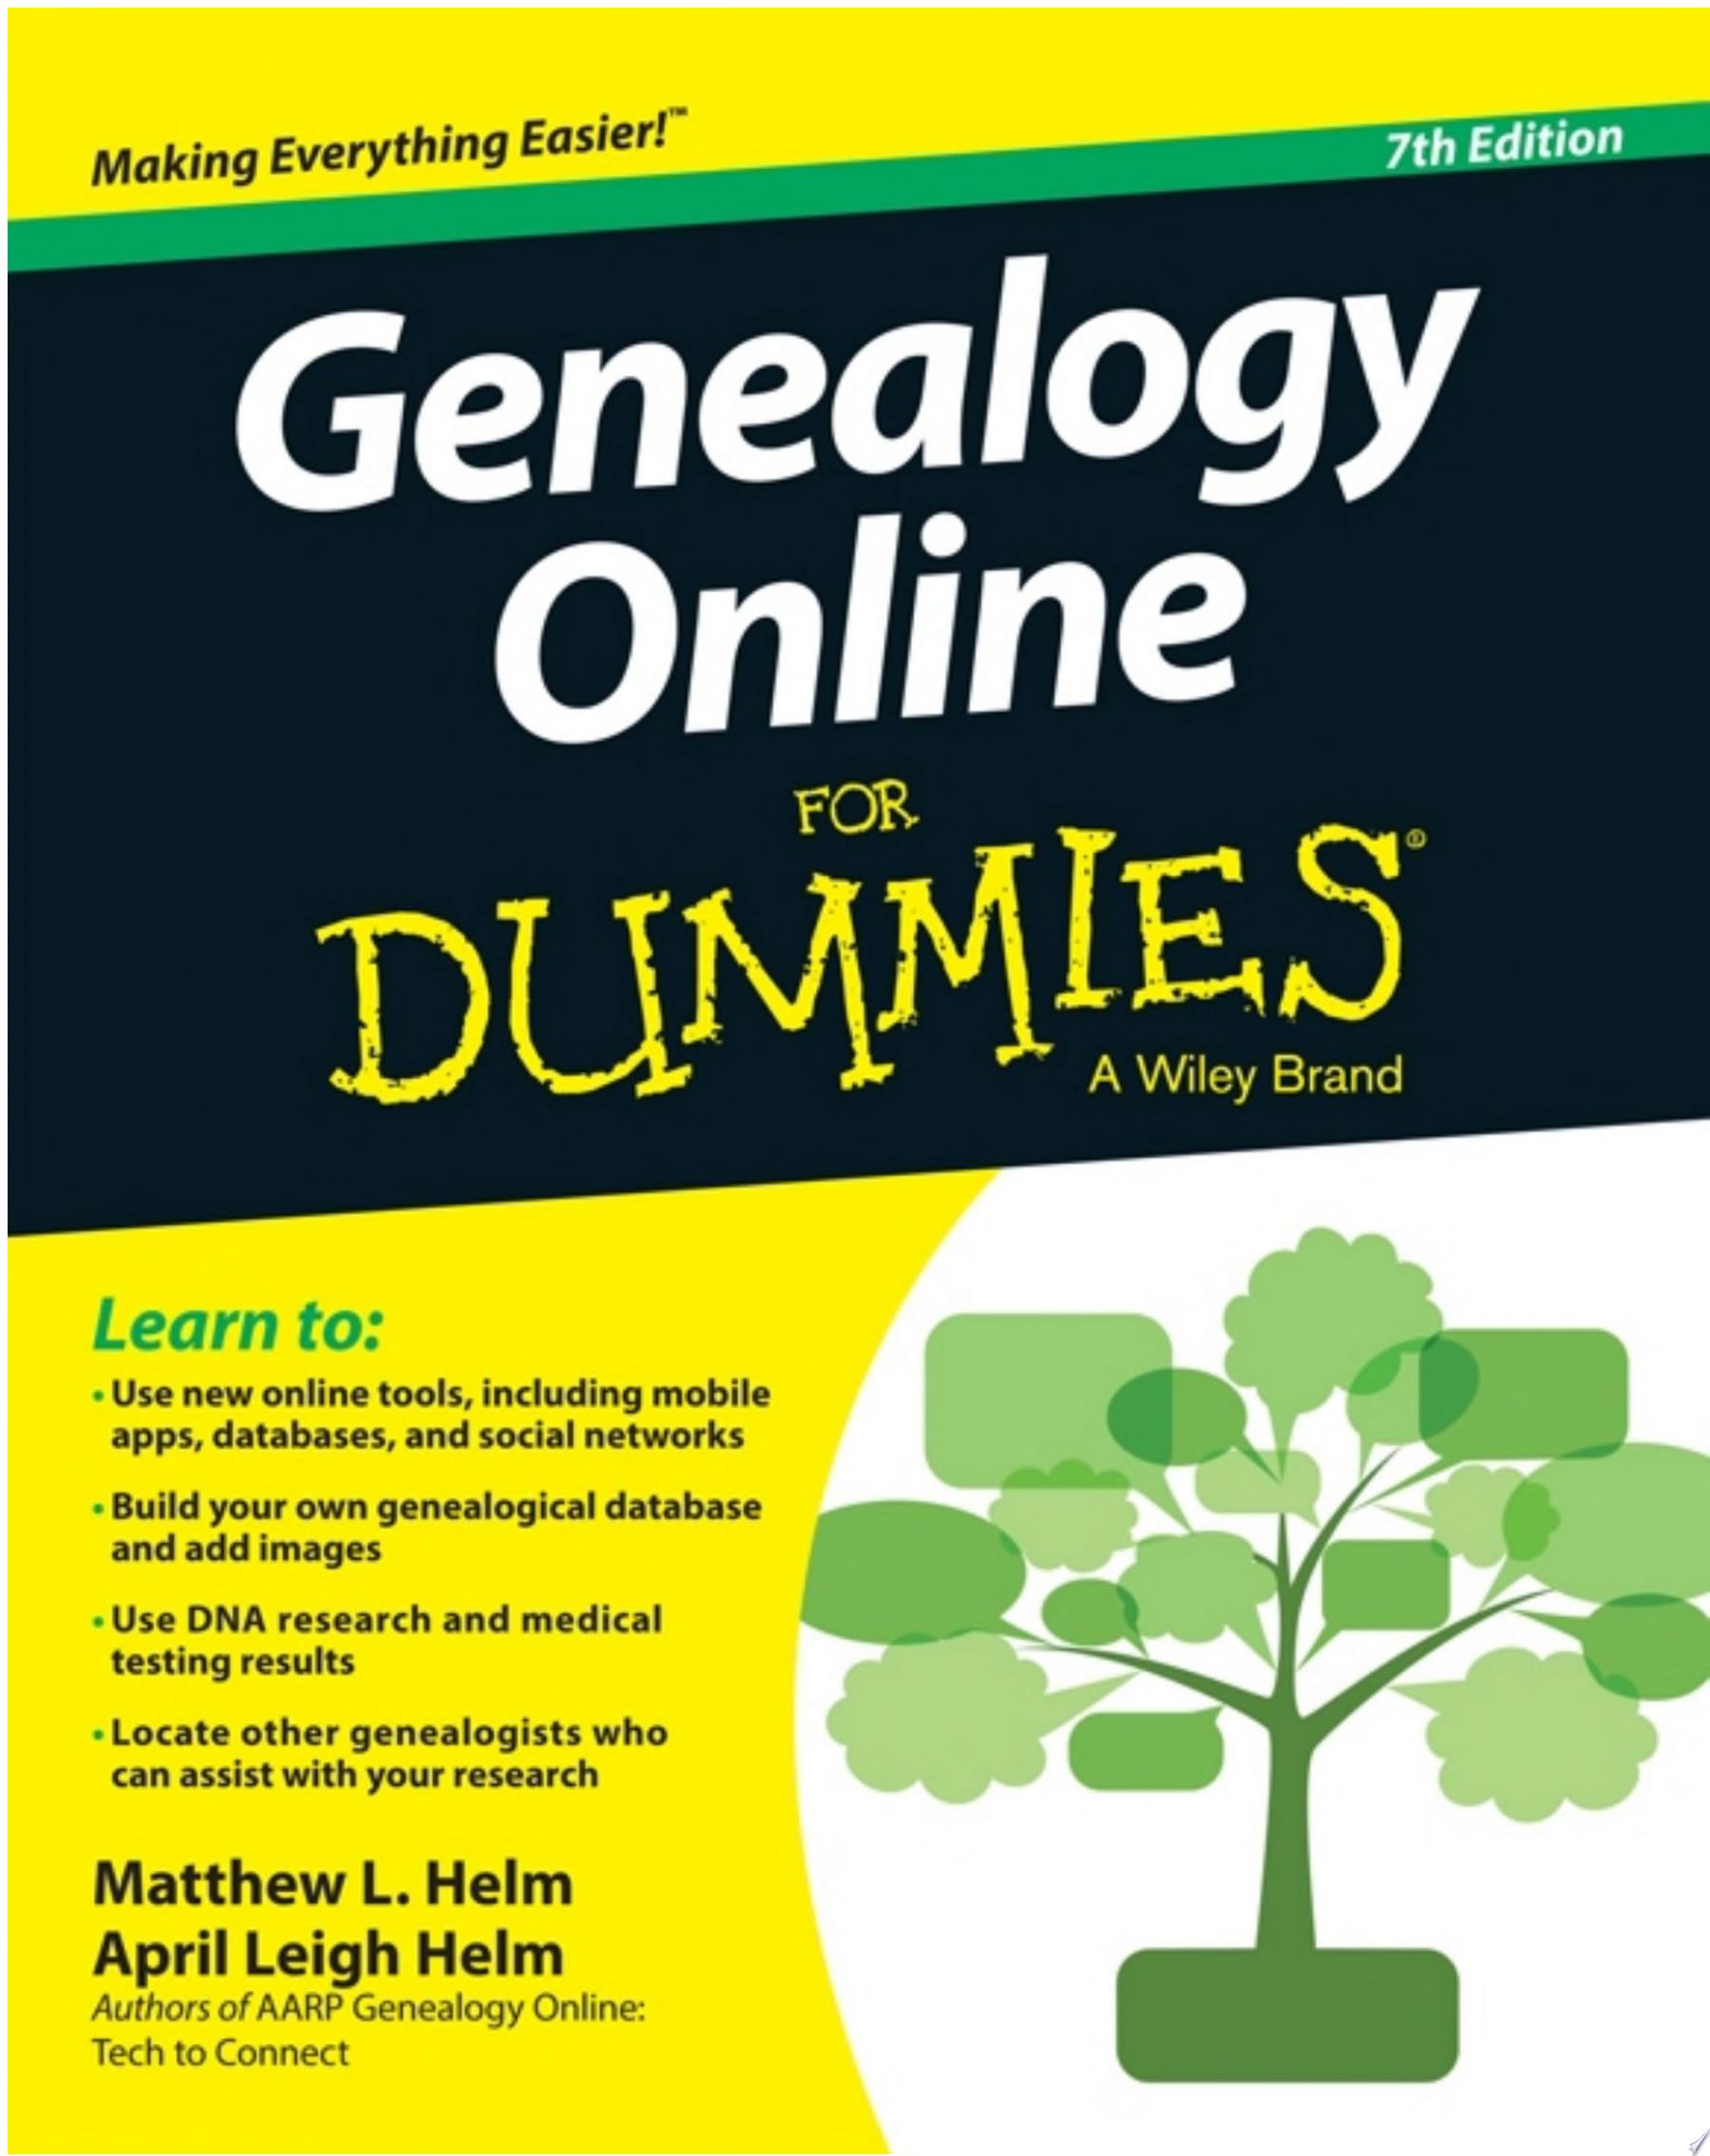 Image for "Genealogy Online For Dummies"